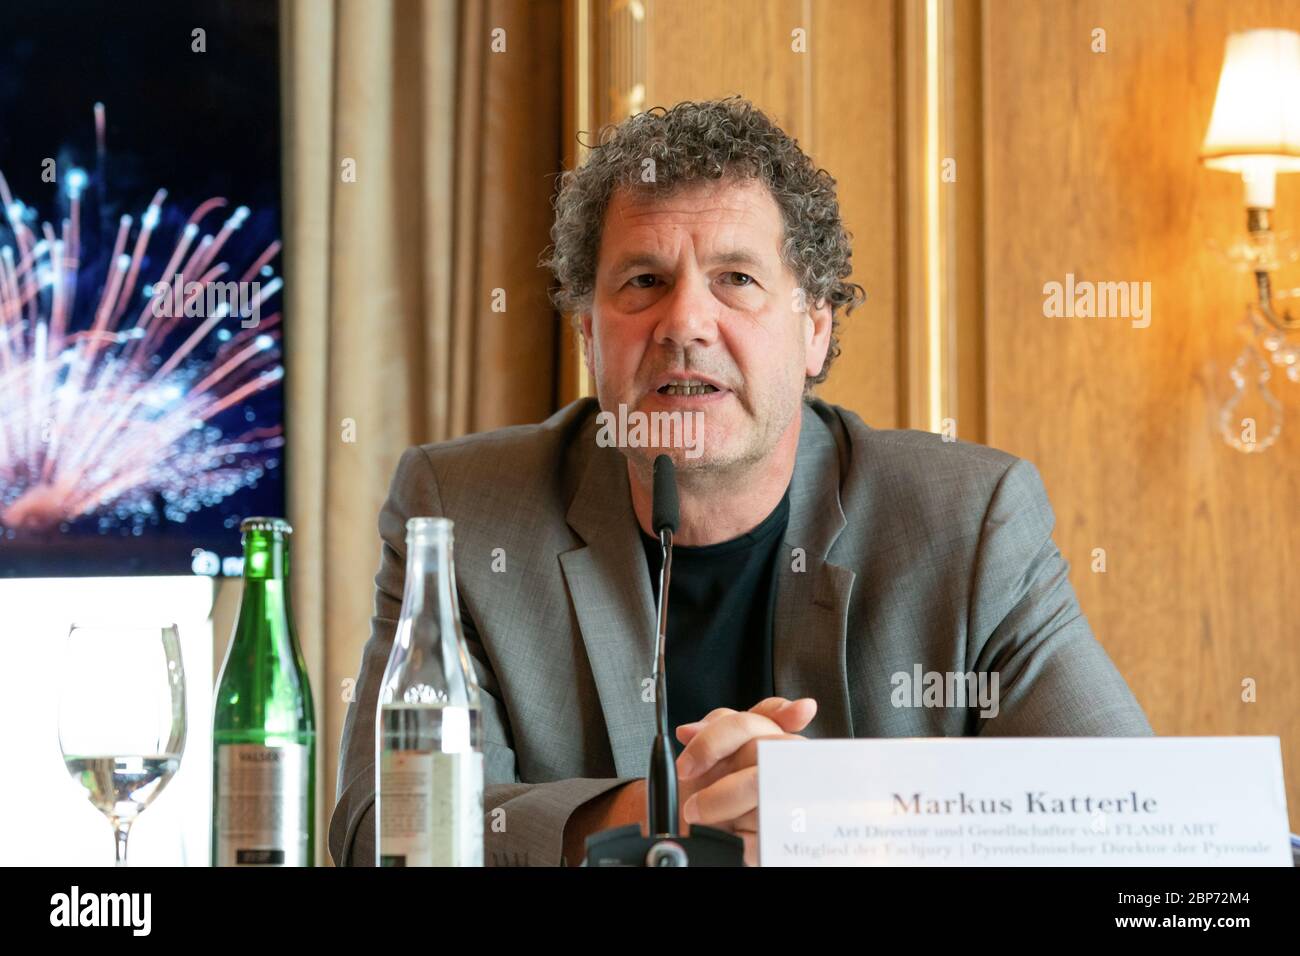 Markus Katterle (Art Director and Partner of FLASH ART and Pyrotechnic Director of the Pyronale) at the press conference for the Pyronale 2019, the motto of the 14th Fireworks World Championship is 'Best of Six' at the Regent Hotel. Stock Photo